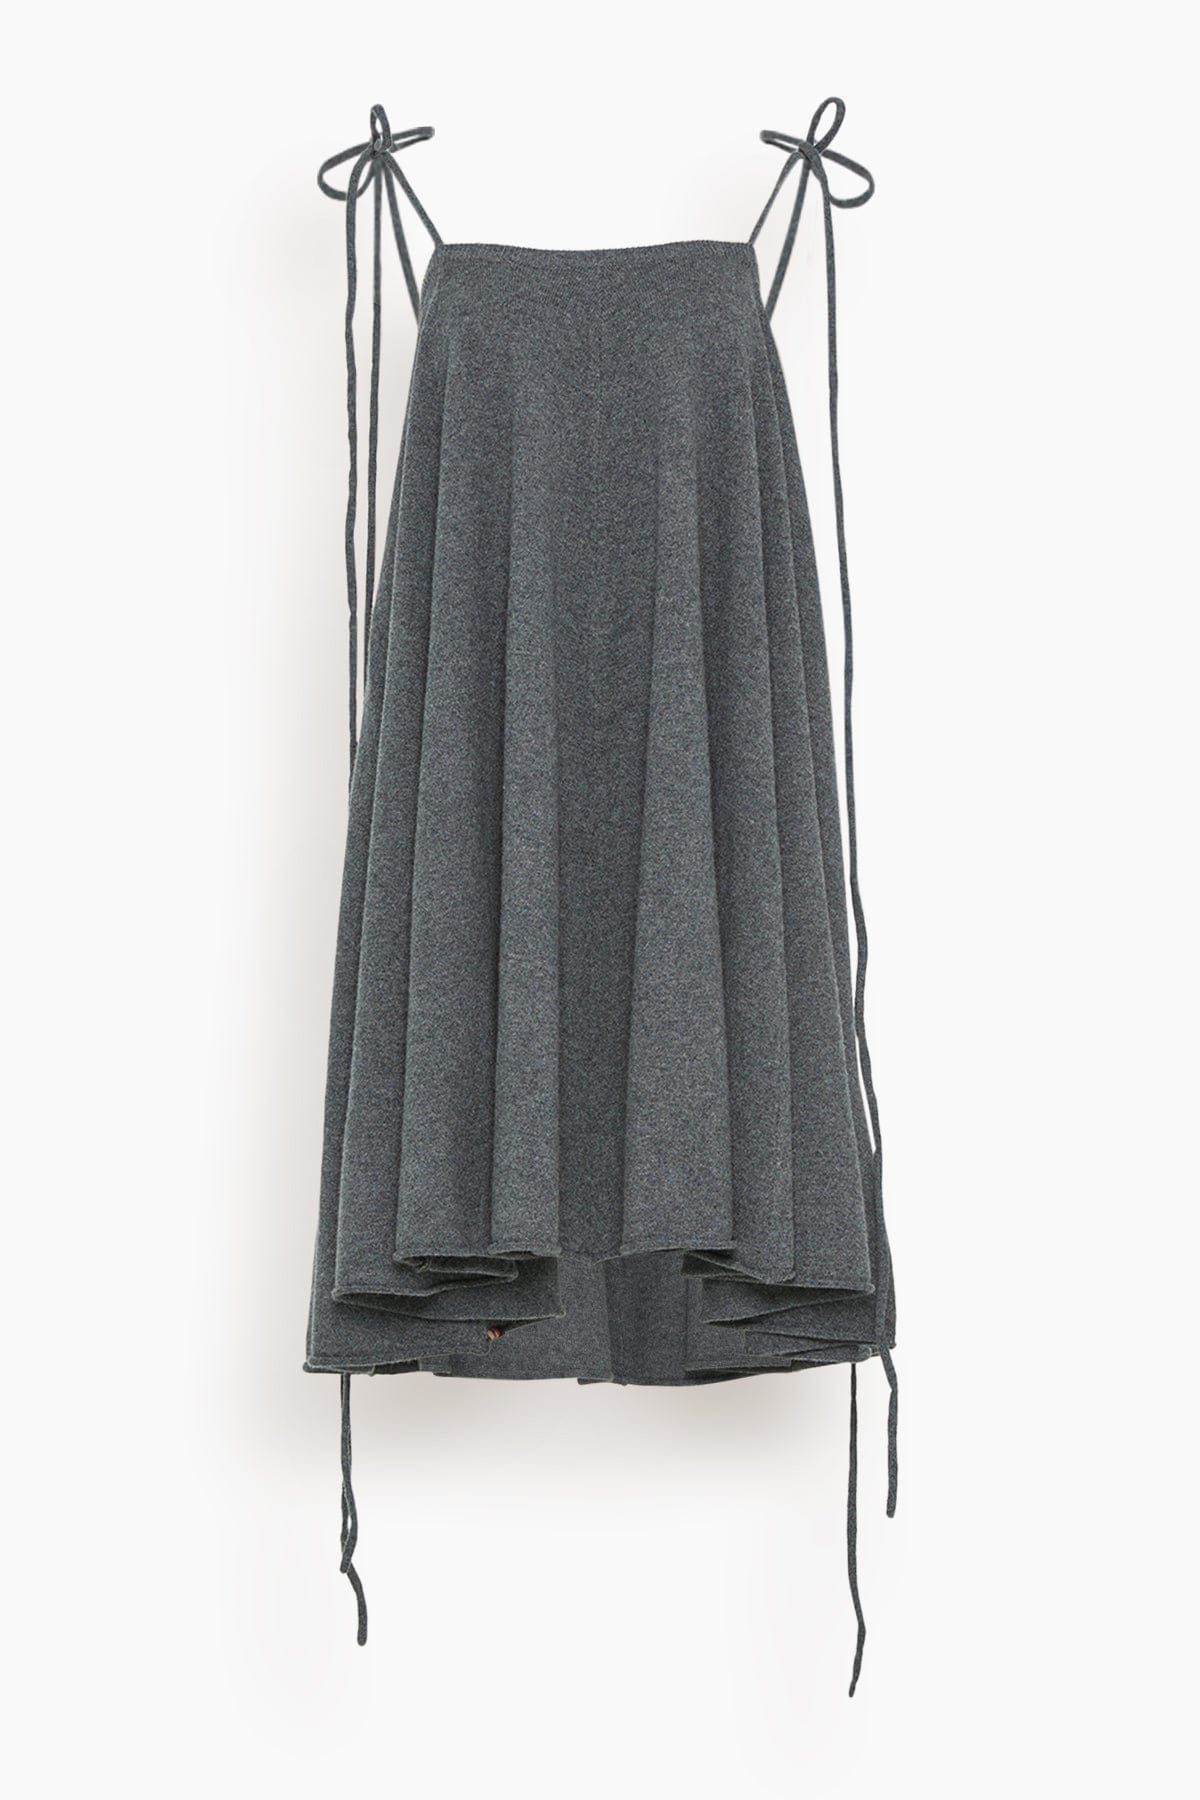 Extreme Cashmere Baby Dress in Felt - Grey - Size: O / S